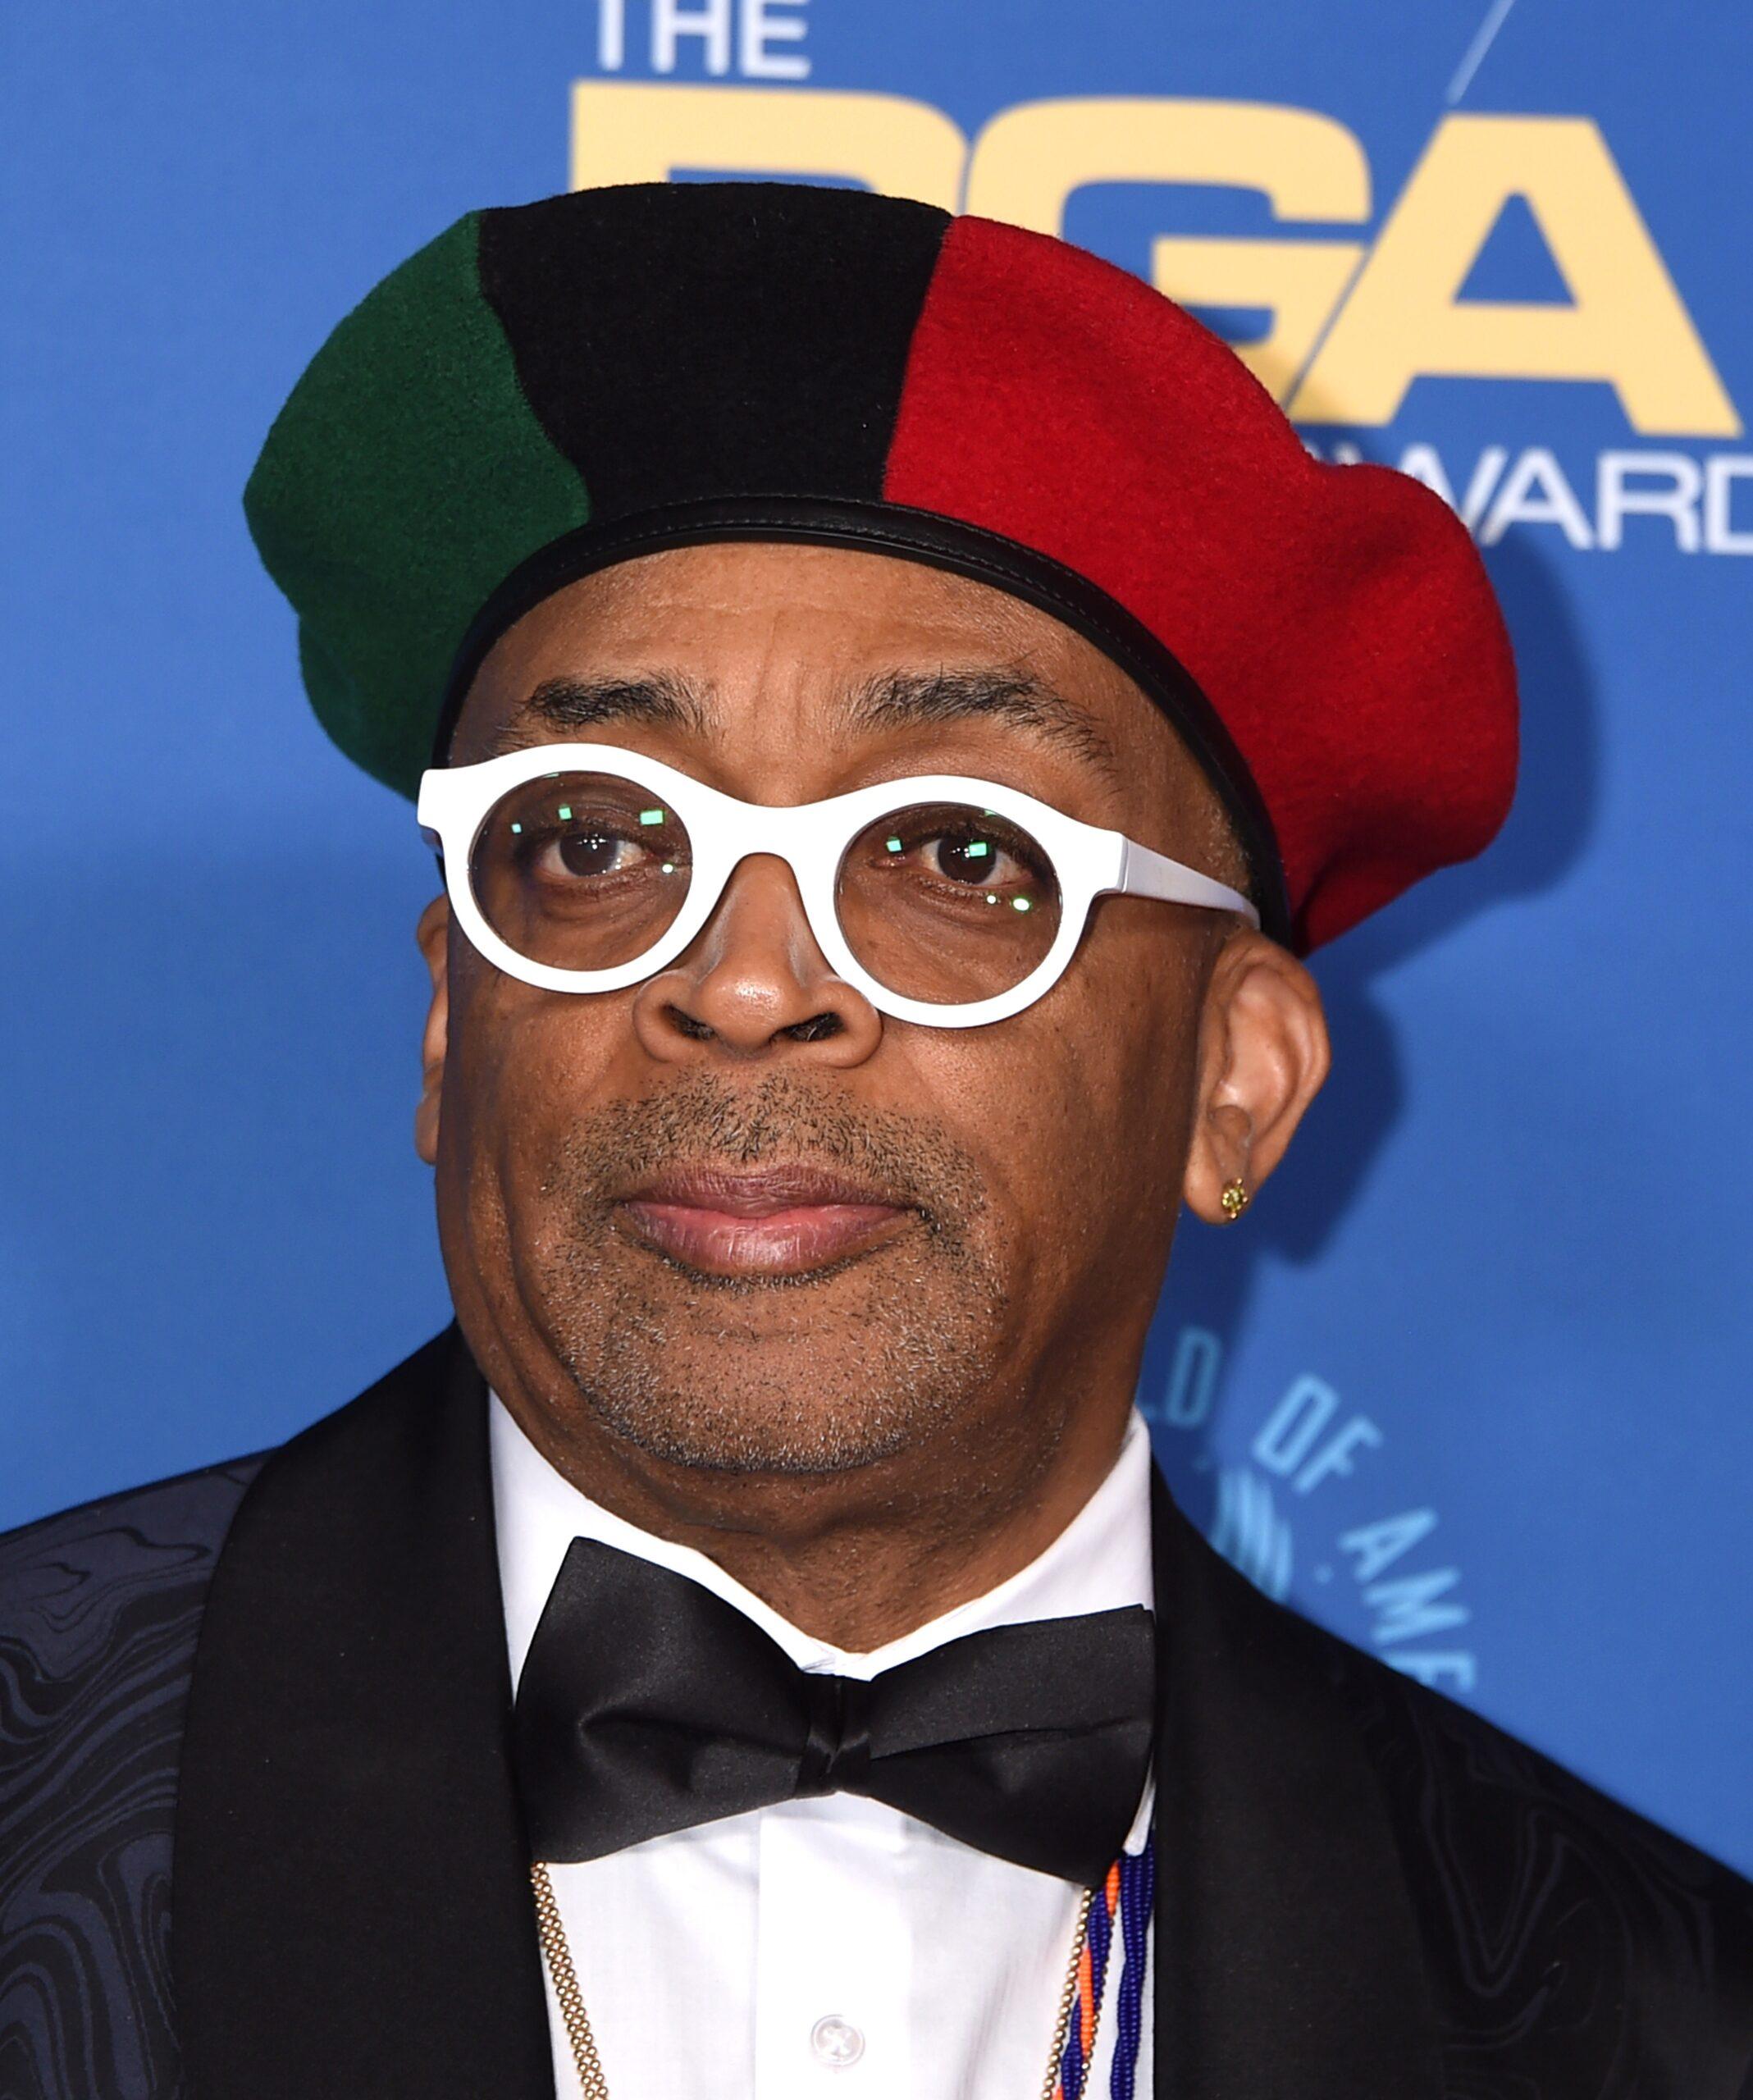 Spike Lee at the 74th Annual DGA Awards